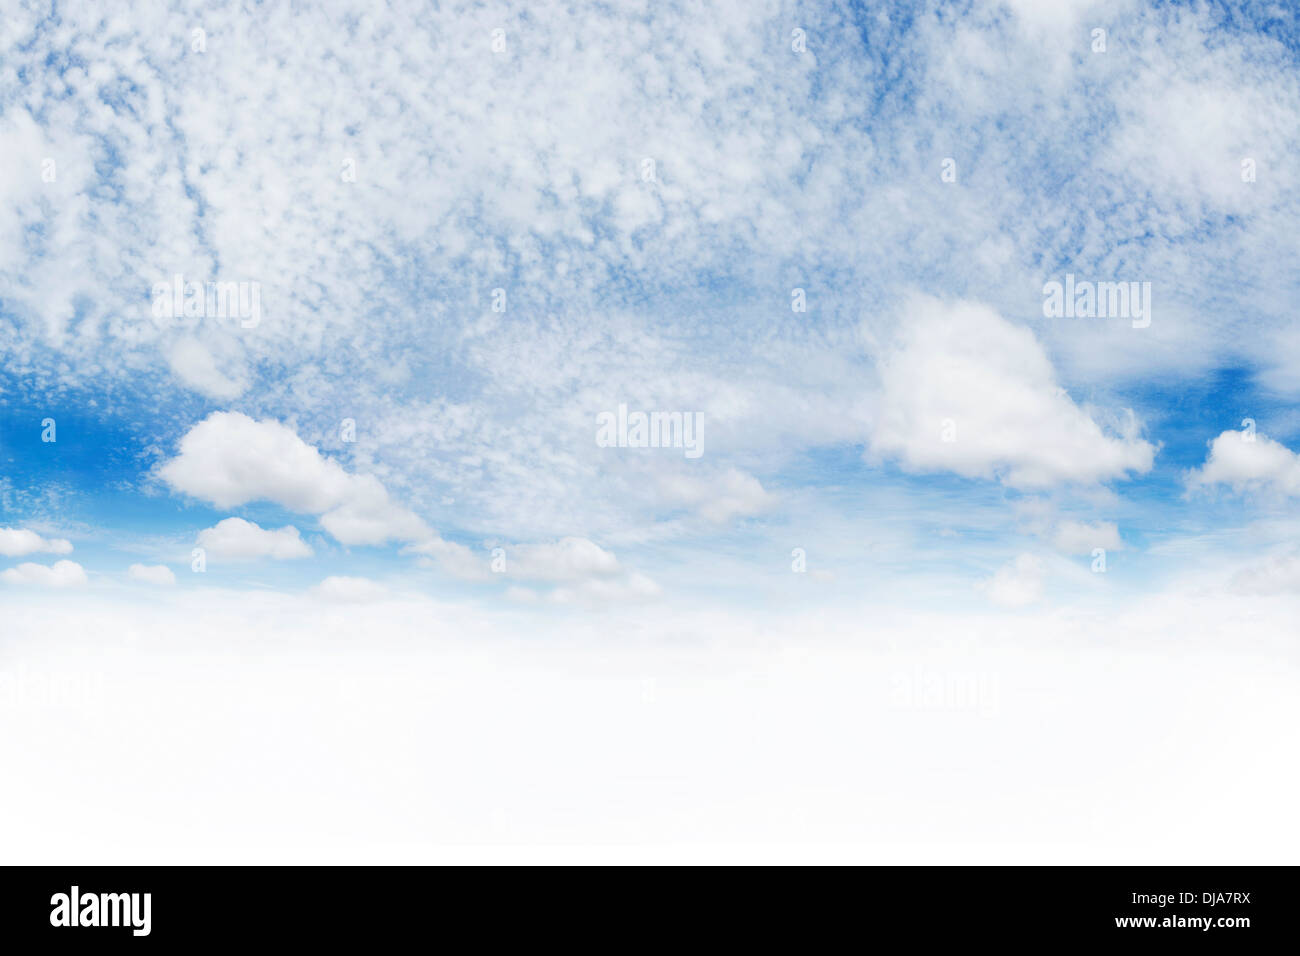 White fluffy clouds in blue sky. Copy space below Stock Photo